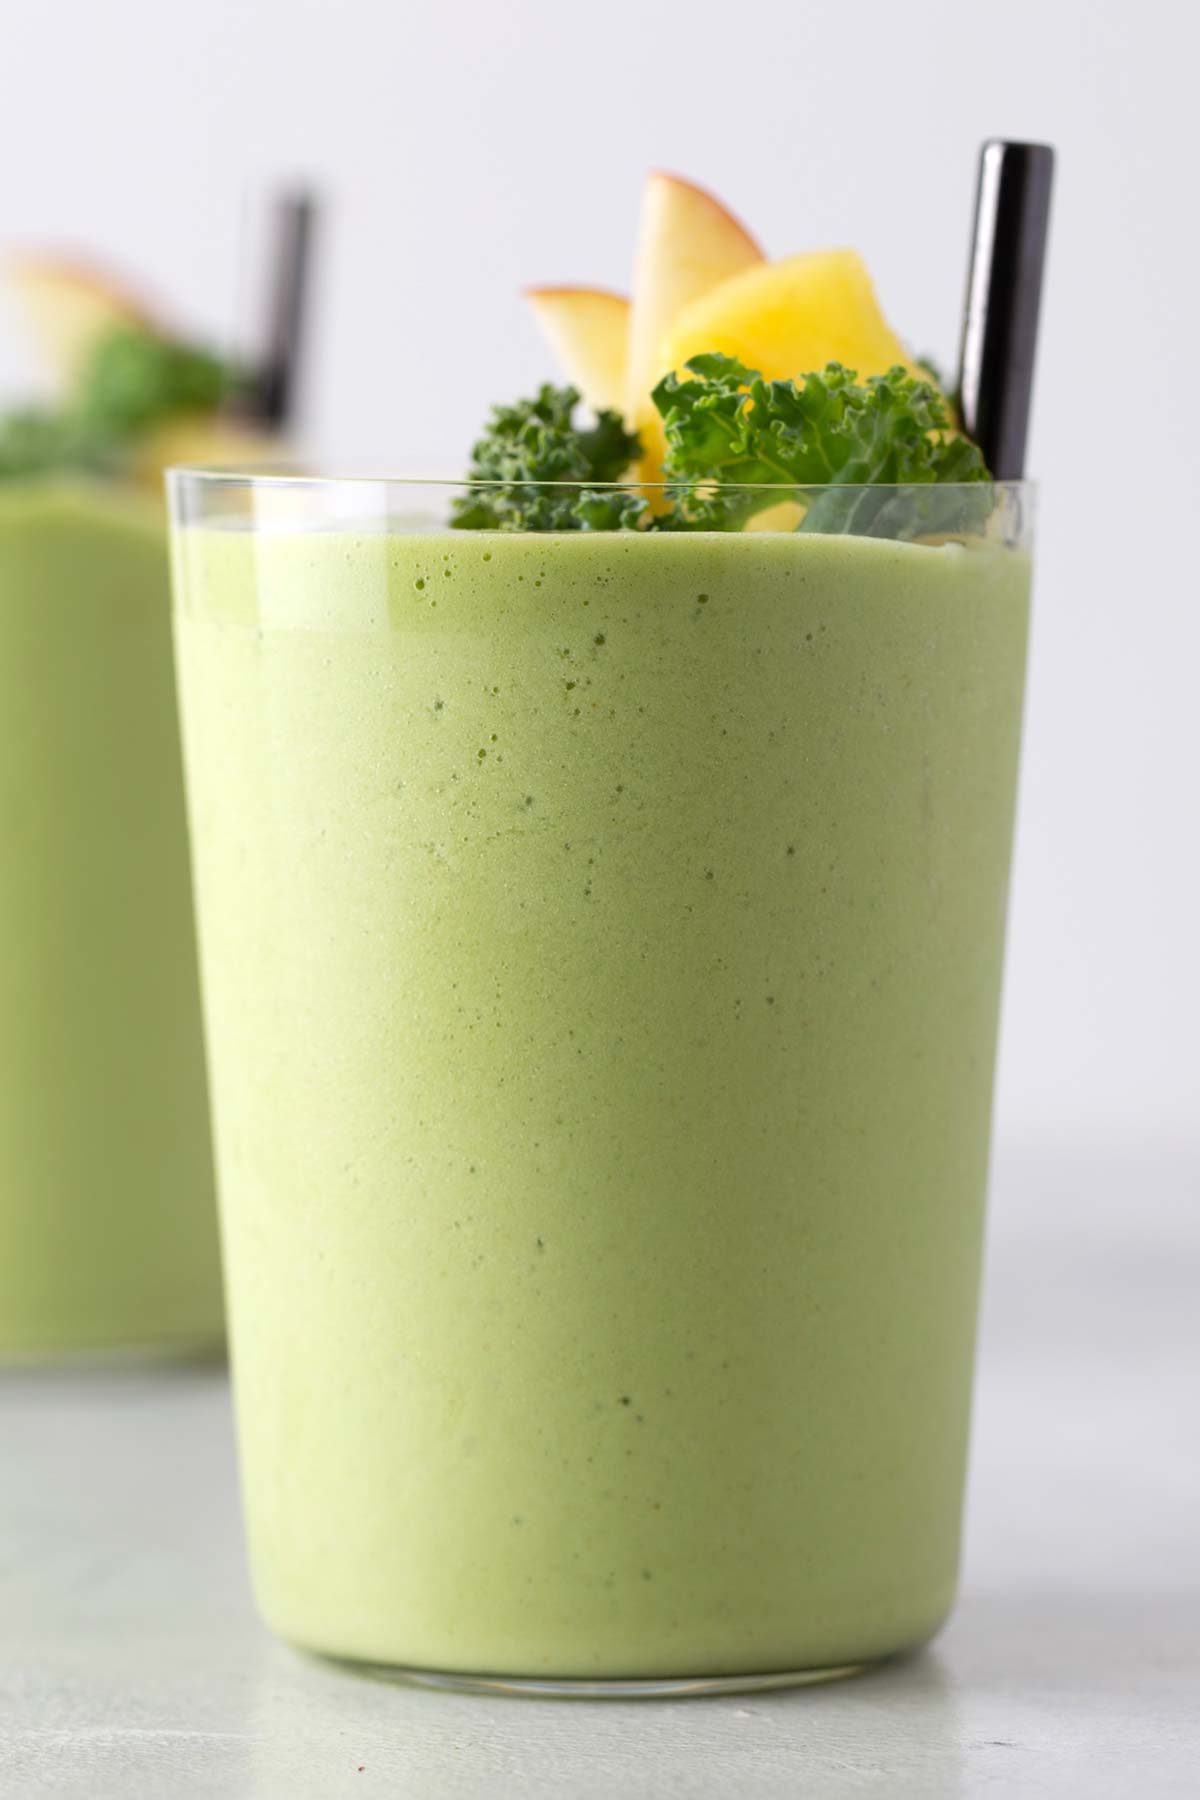 Kale smoothie in a cup.